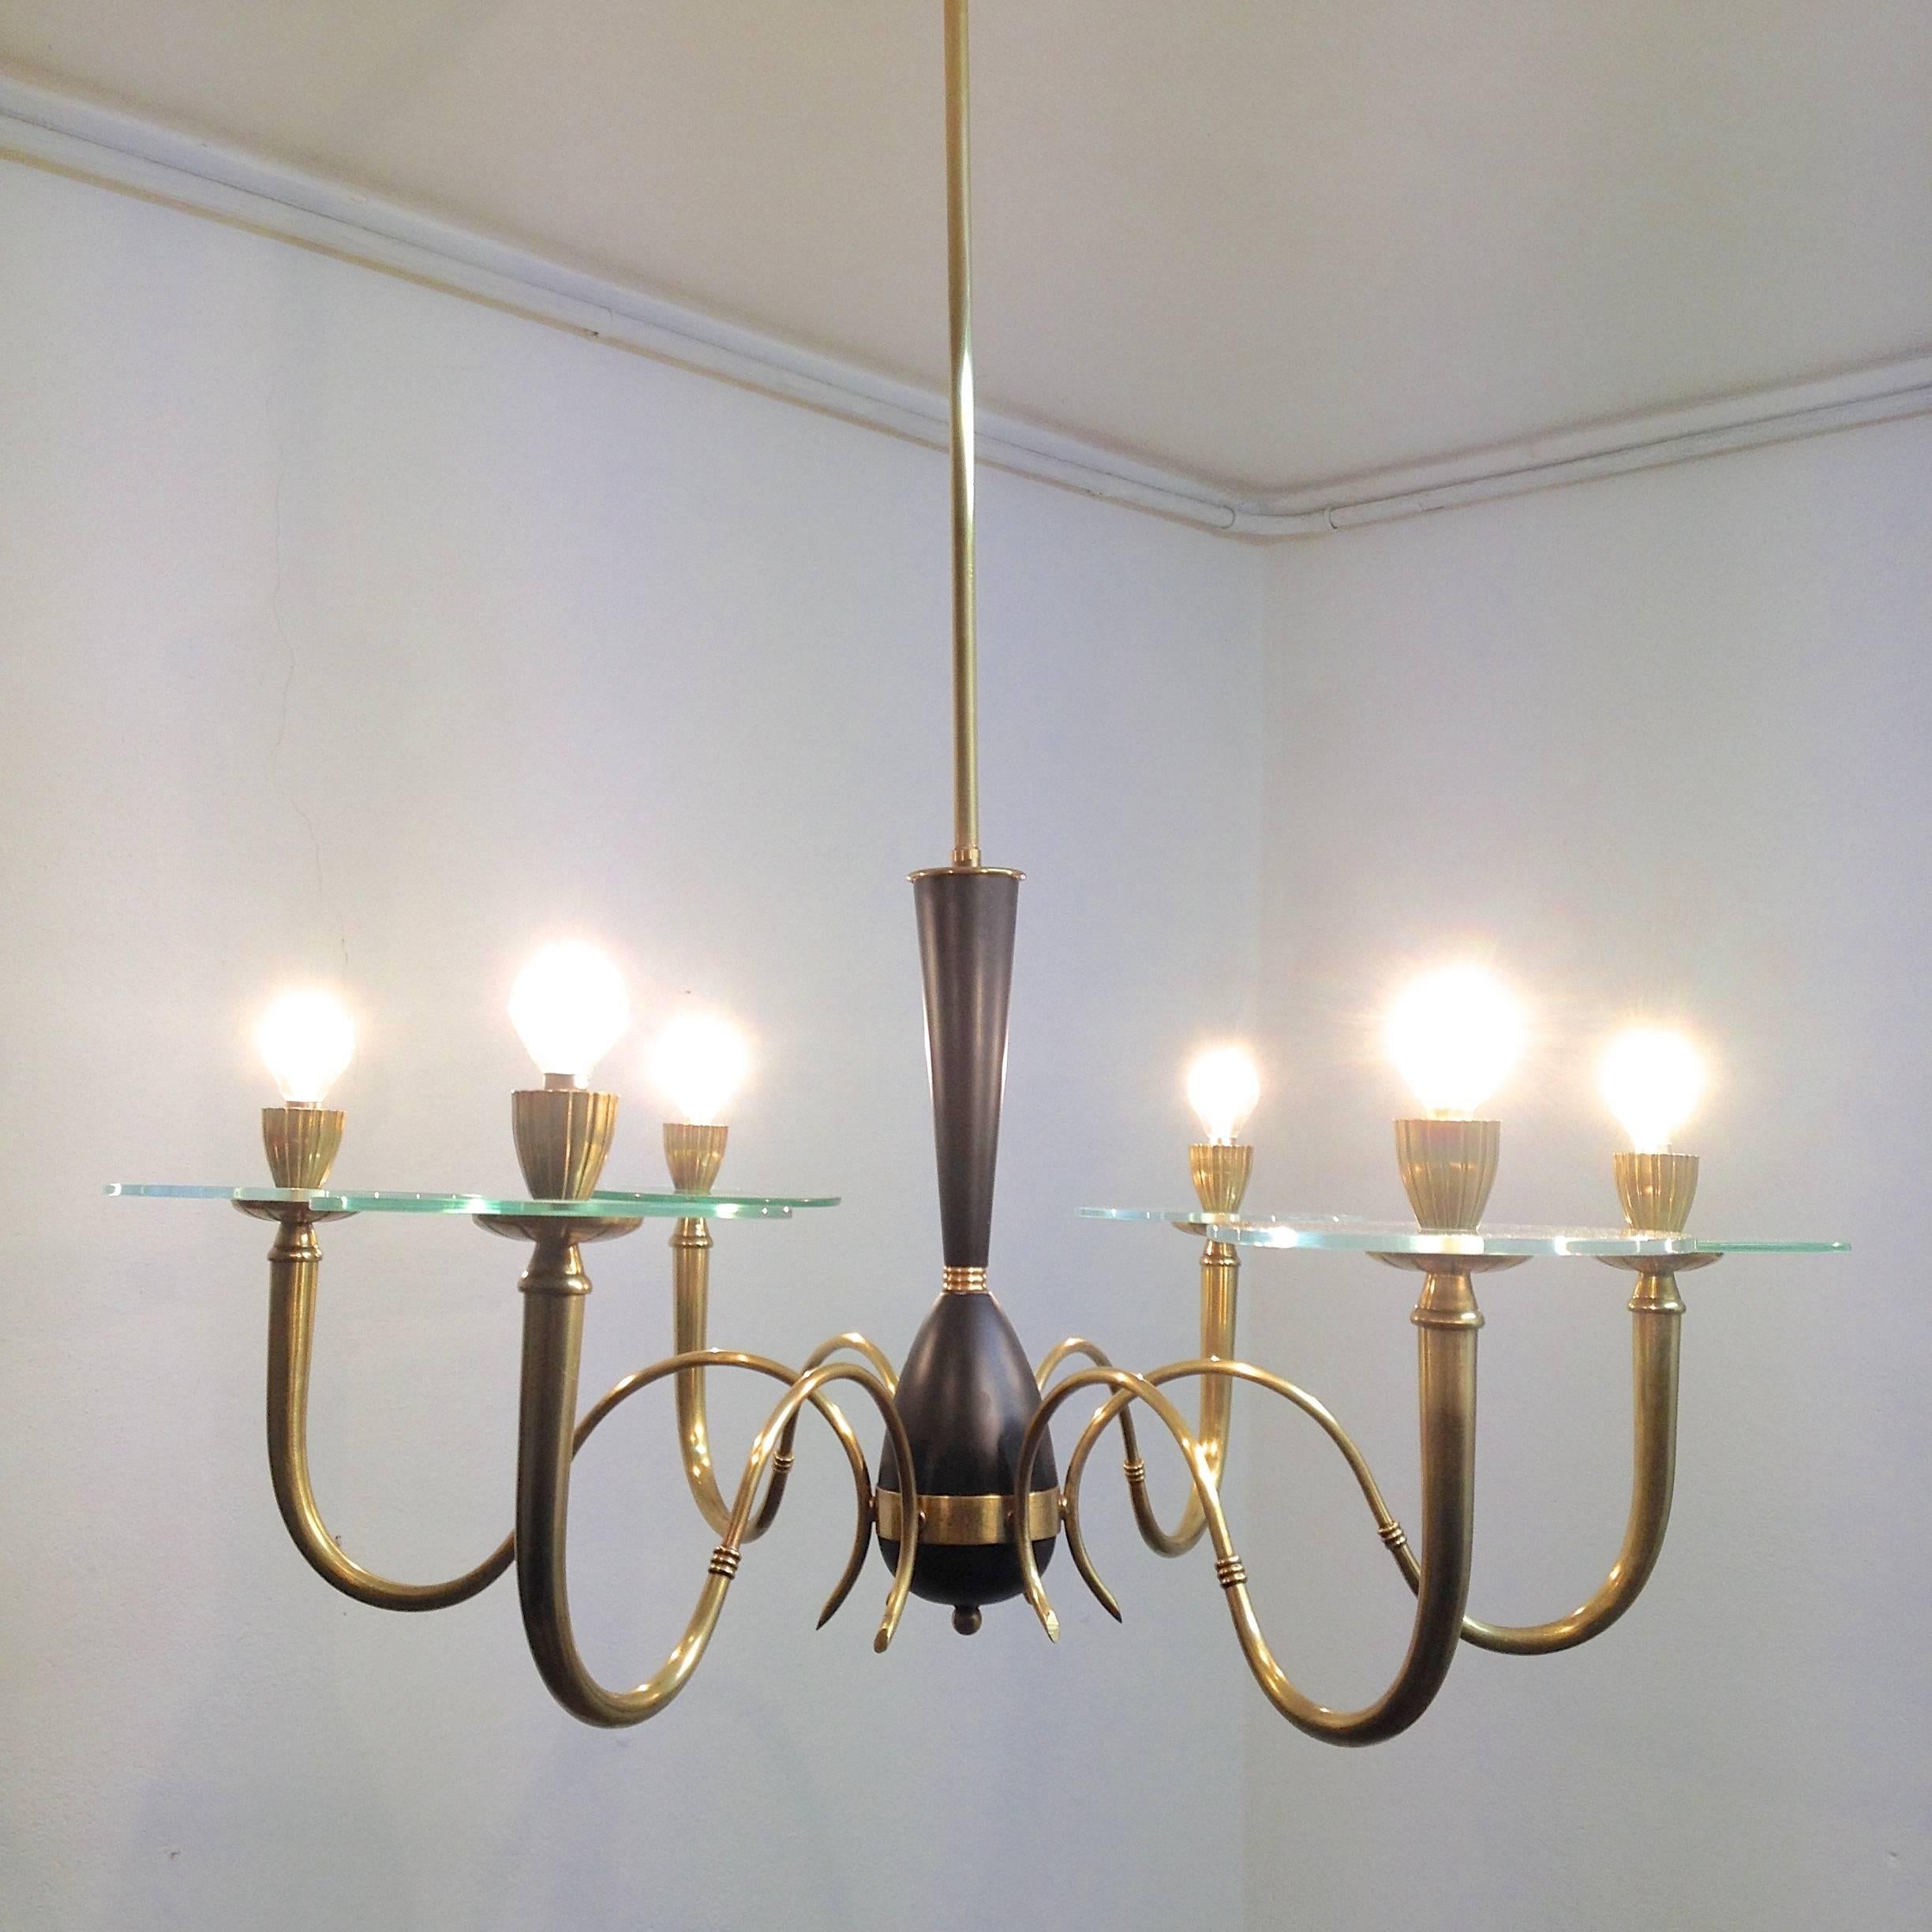 Elegant but modern chandelier with 6 brass arms that hold a glass disc, 3 with a green nuance and 3 more clear coloured glasses. Middle section is black metal and brass details. The sconce of the light fittings are rimmed and have nice detail